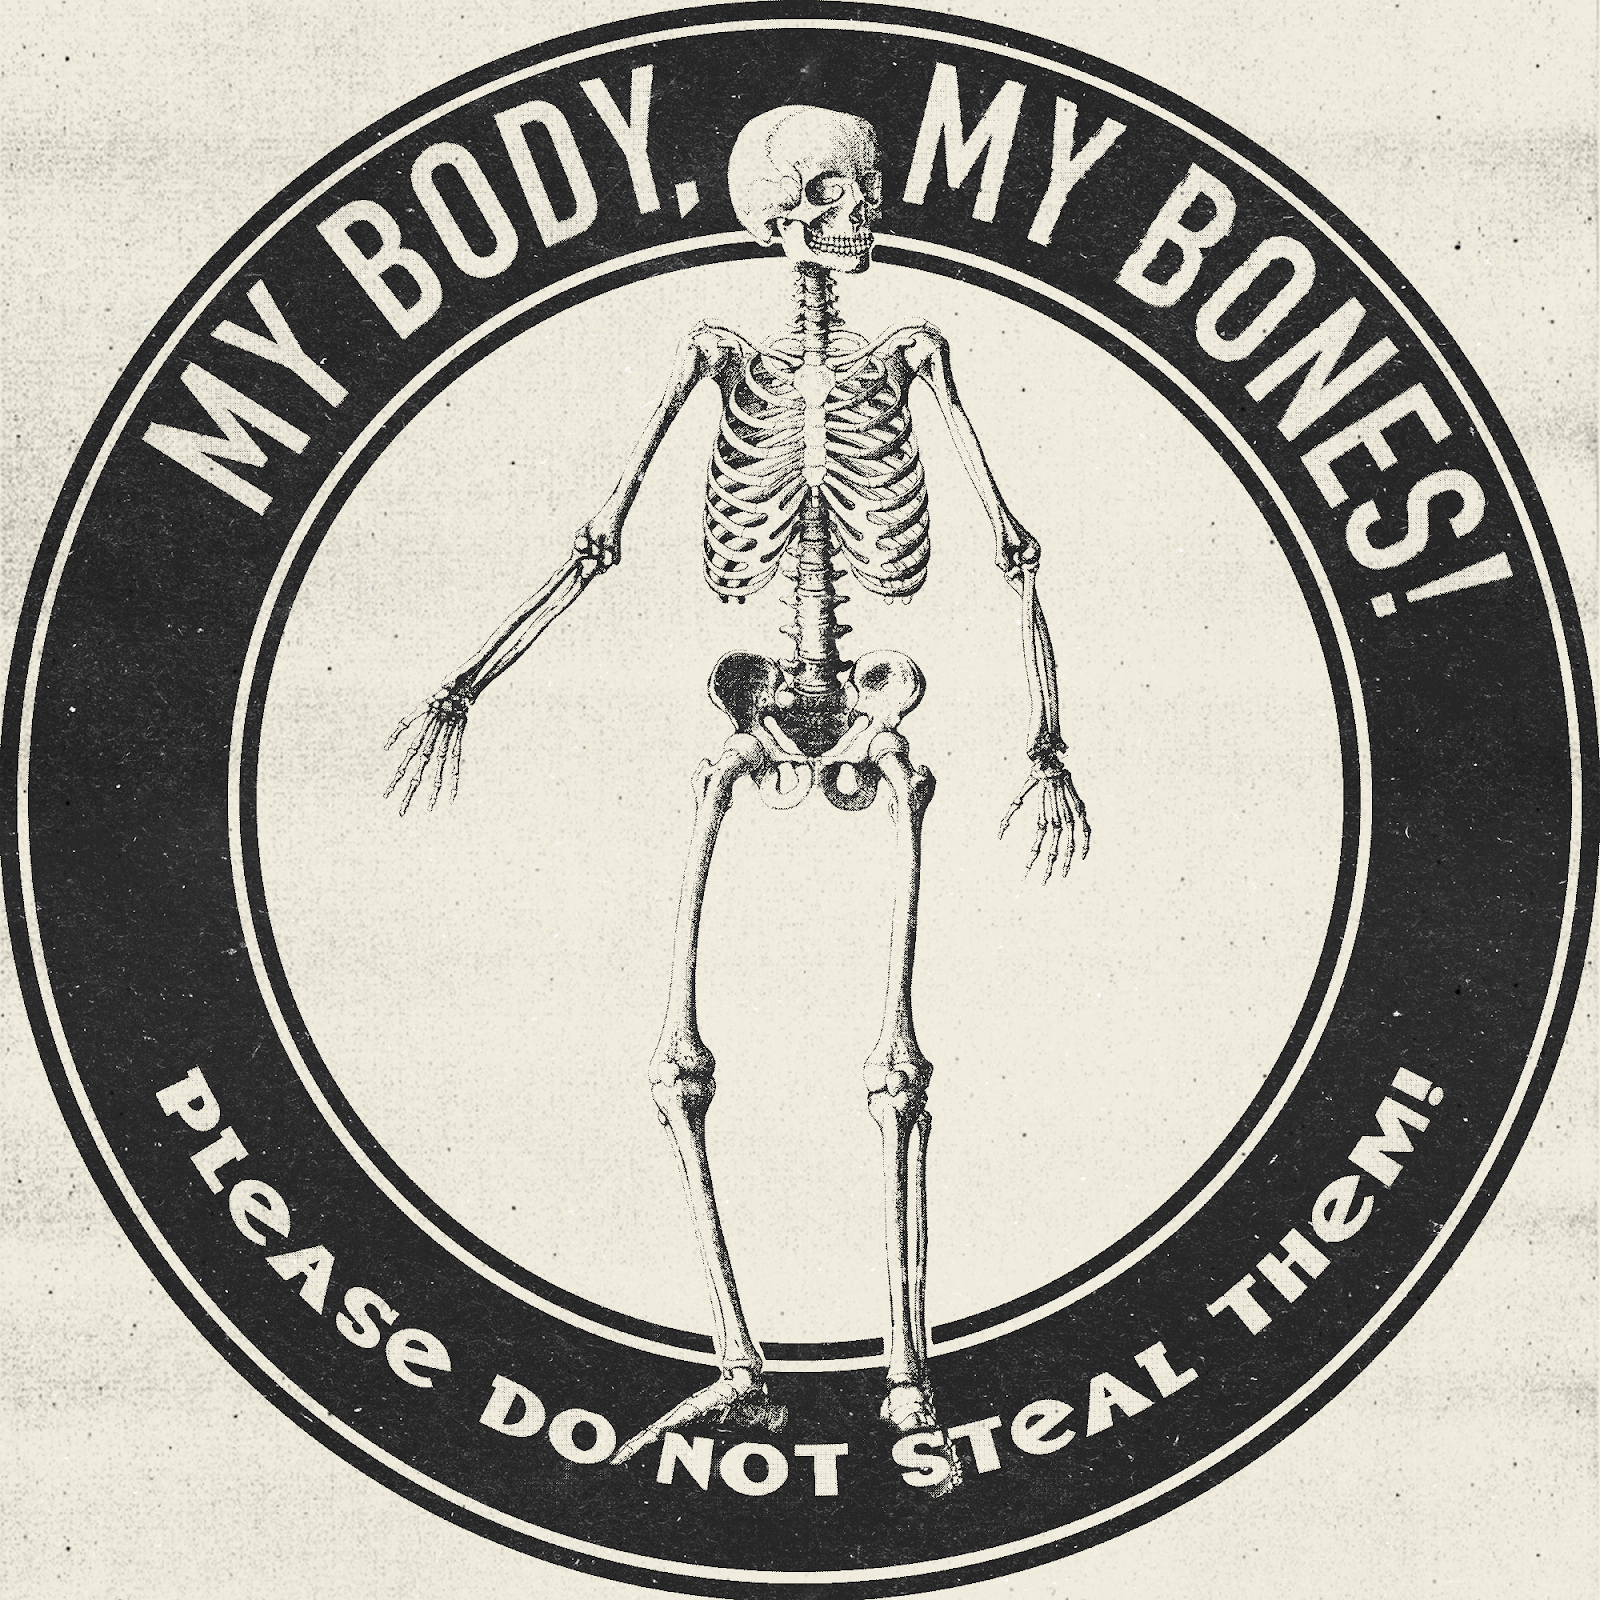 A skeleton stands in the middle of a black circle.  Text on the circle reads "My Body, My Bones!  Please do not steal them!"